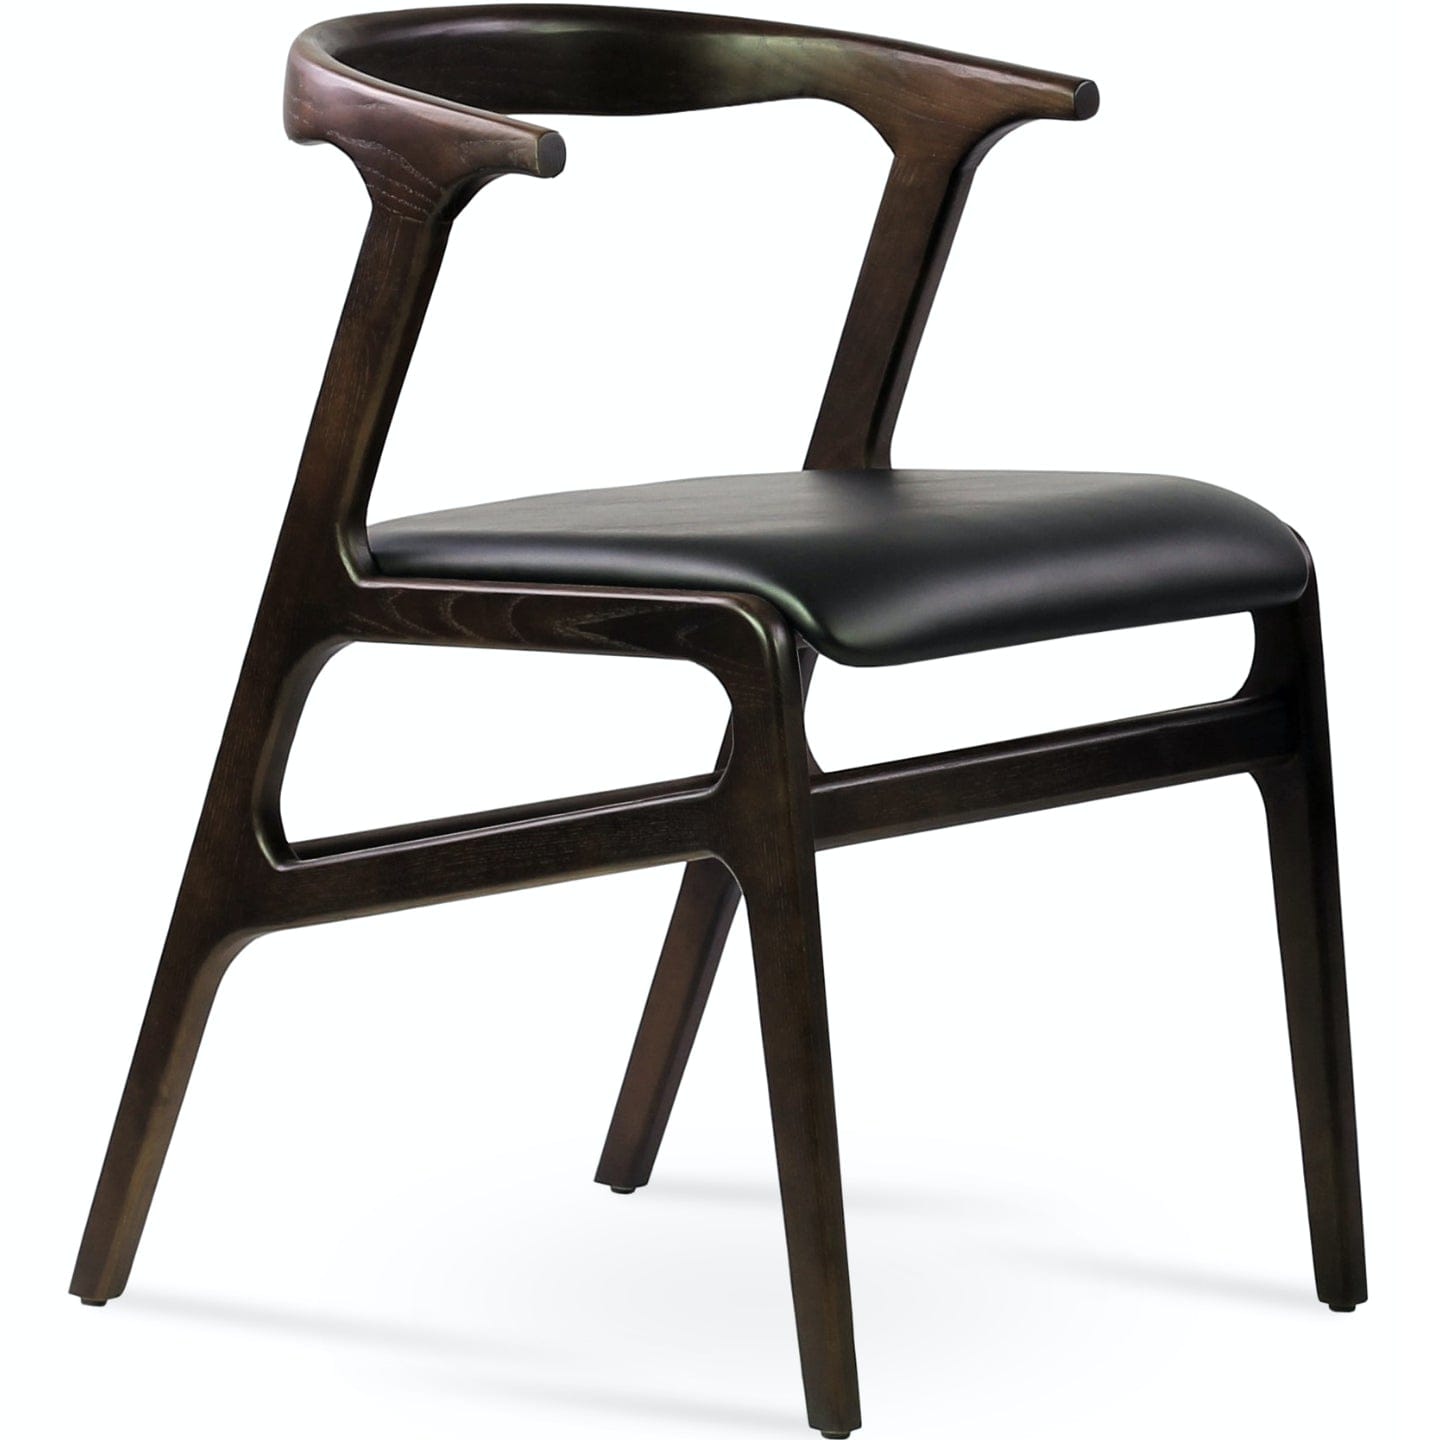 Soho Concept morelato-armchair-walnut-wood-base-faux-leather-seat-dining-chair-in-black